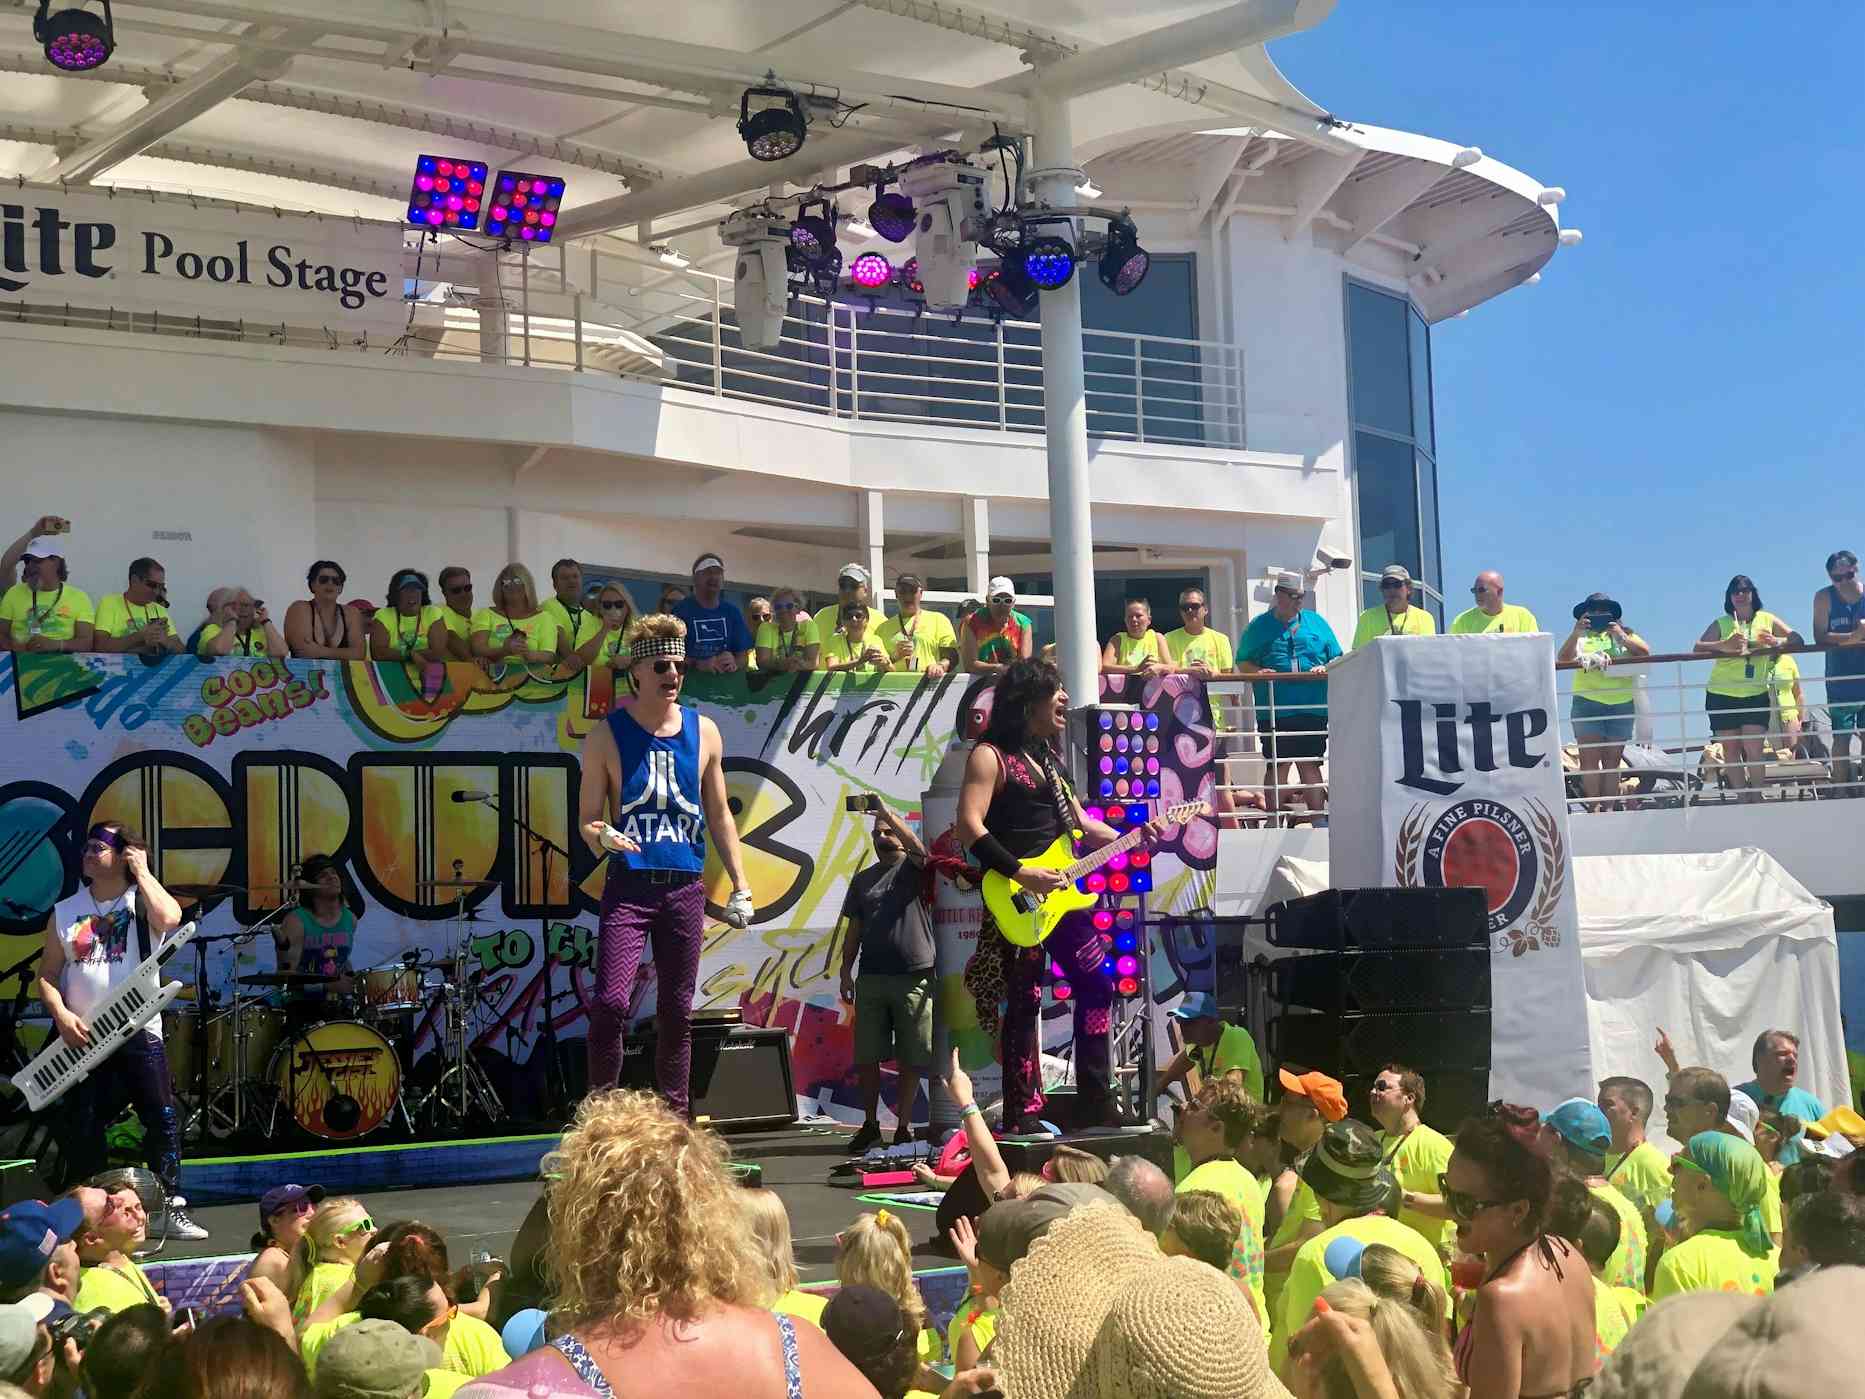 Surprising Things About '60s-Themed Cruise for $4,650, Worth It